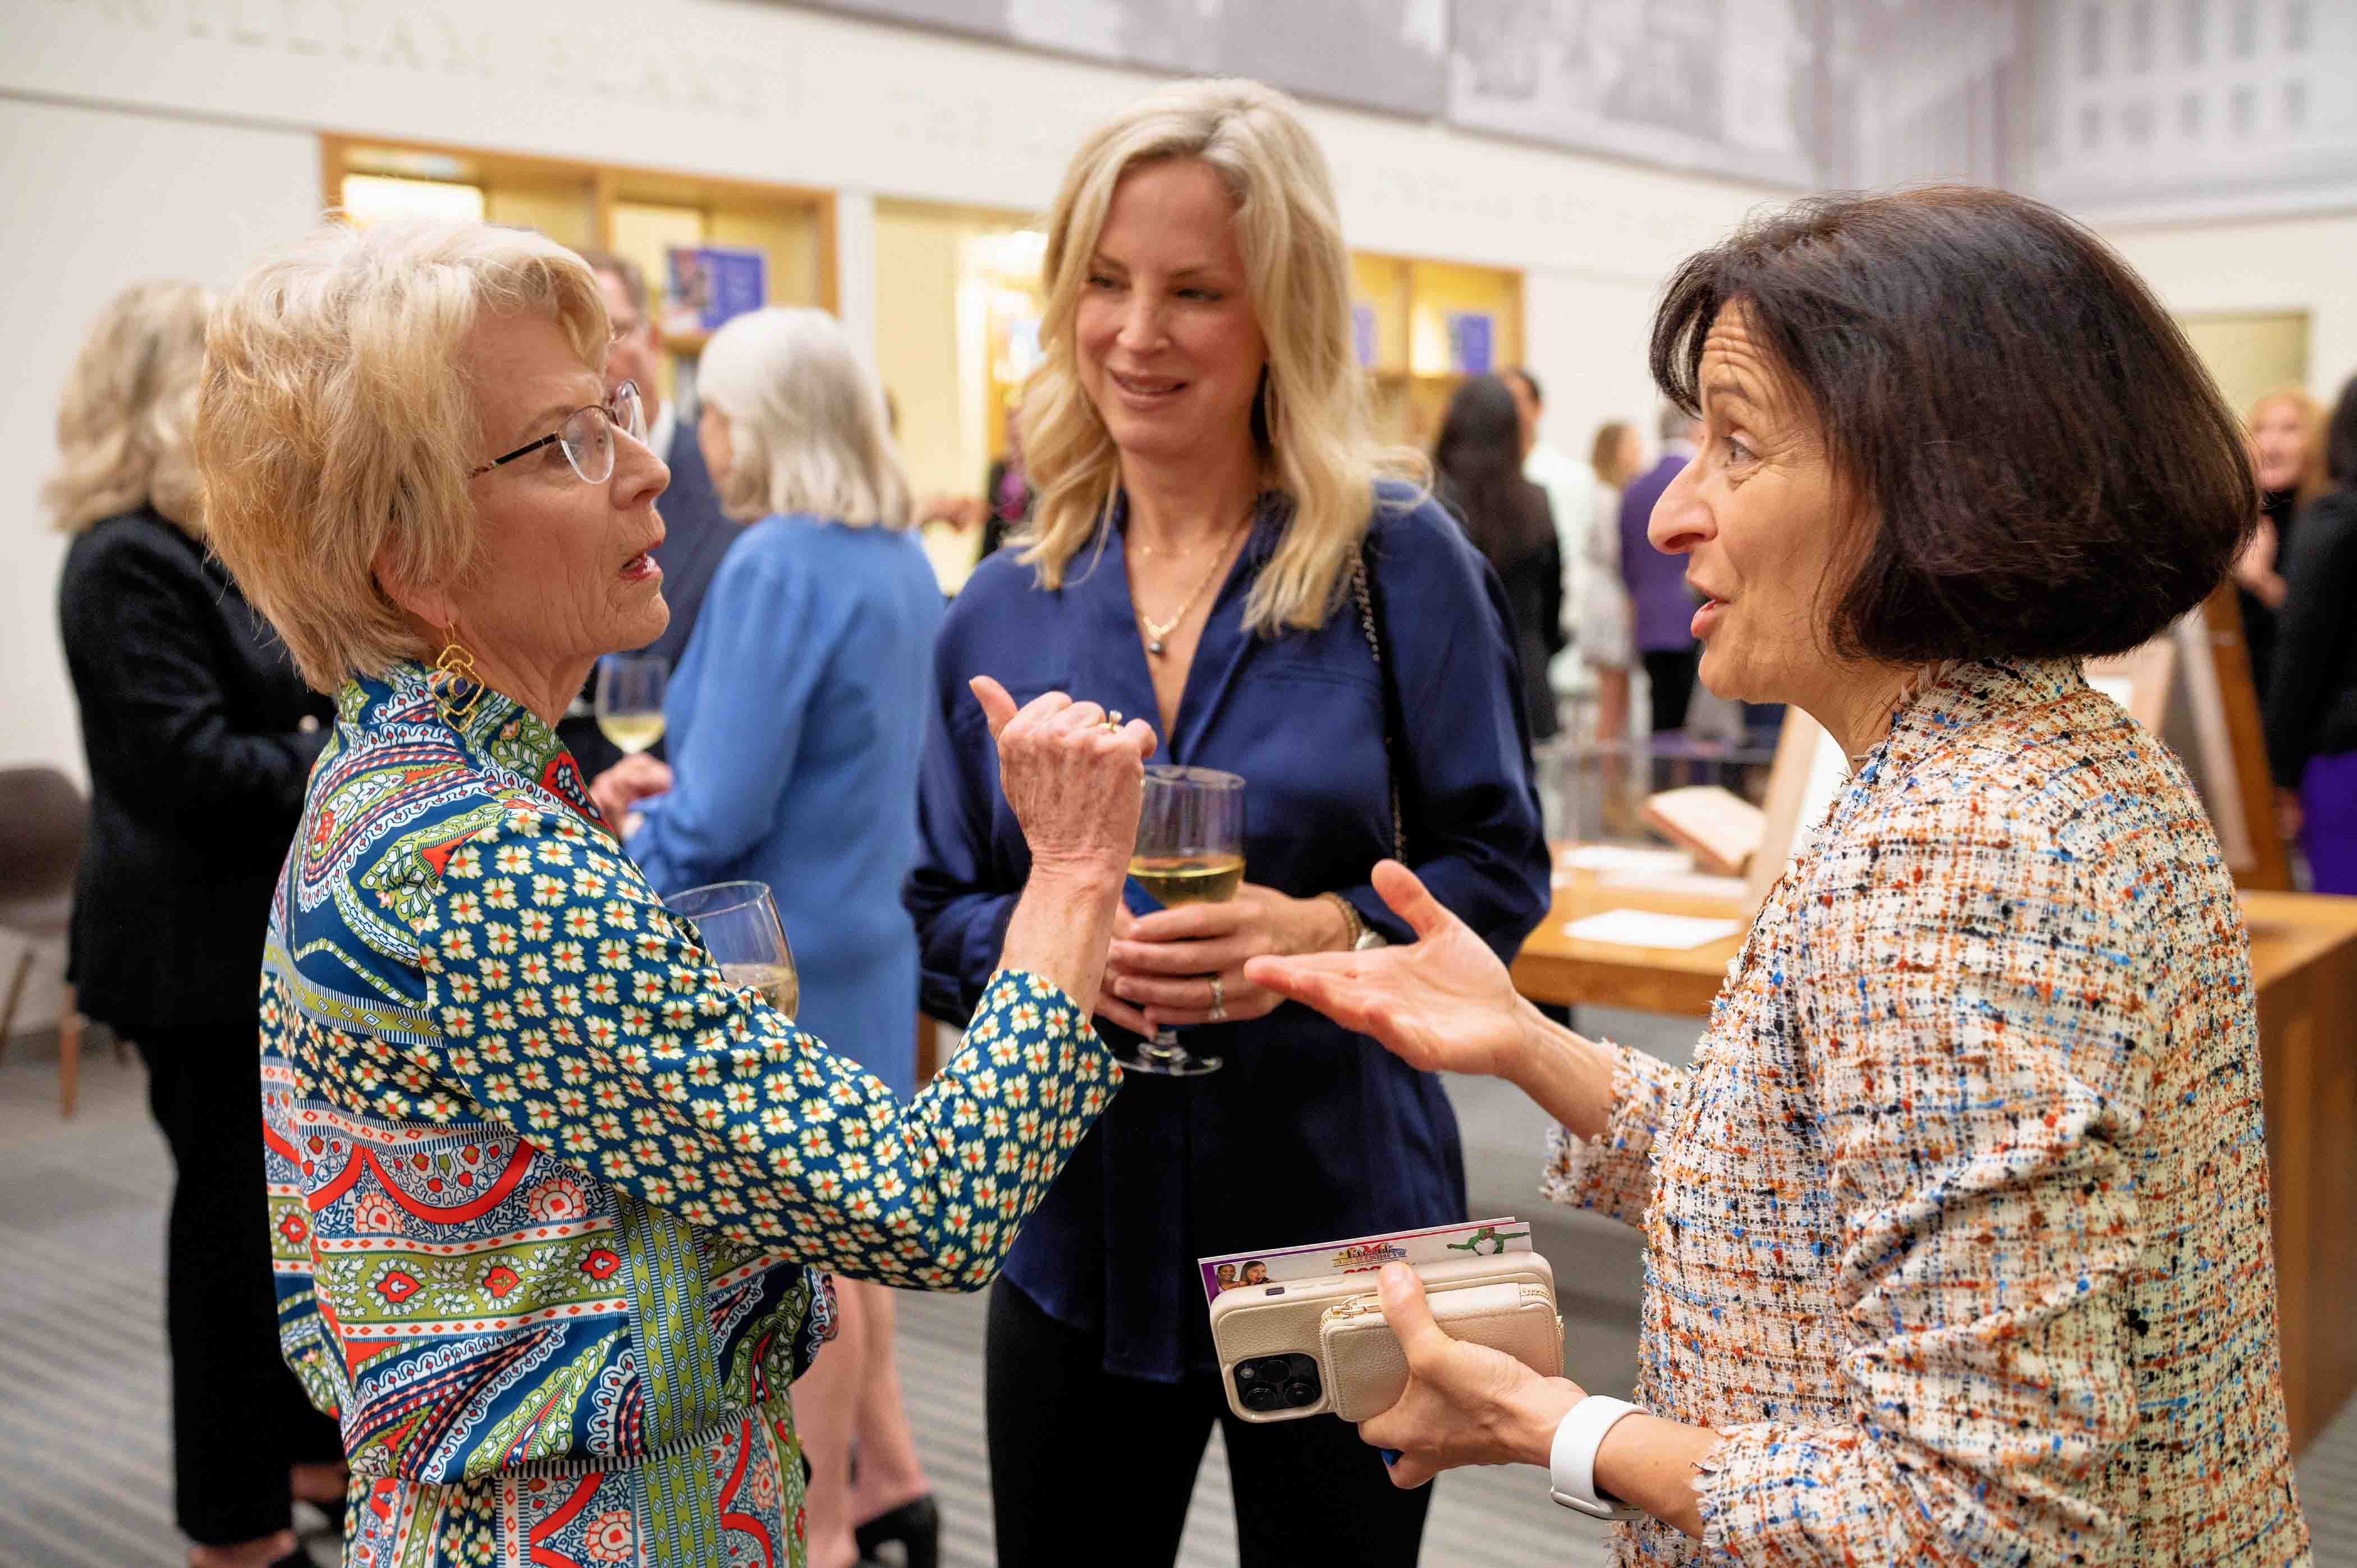 Fundraiser guests talking with Provost Teresa Dahlberg (right)
